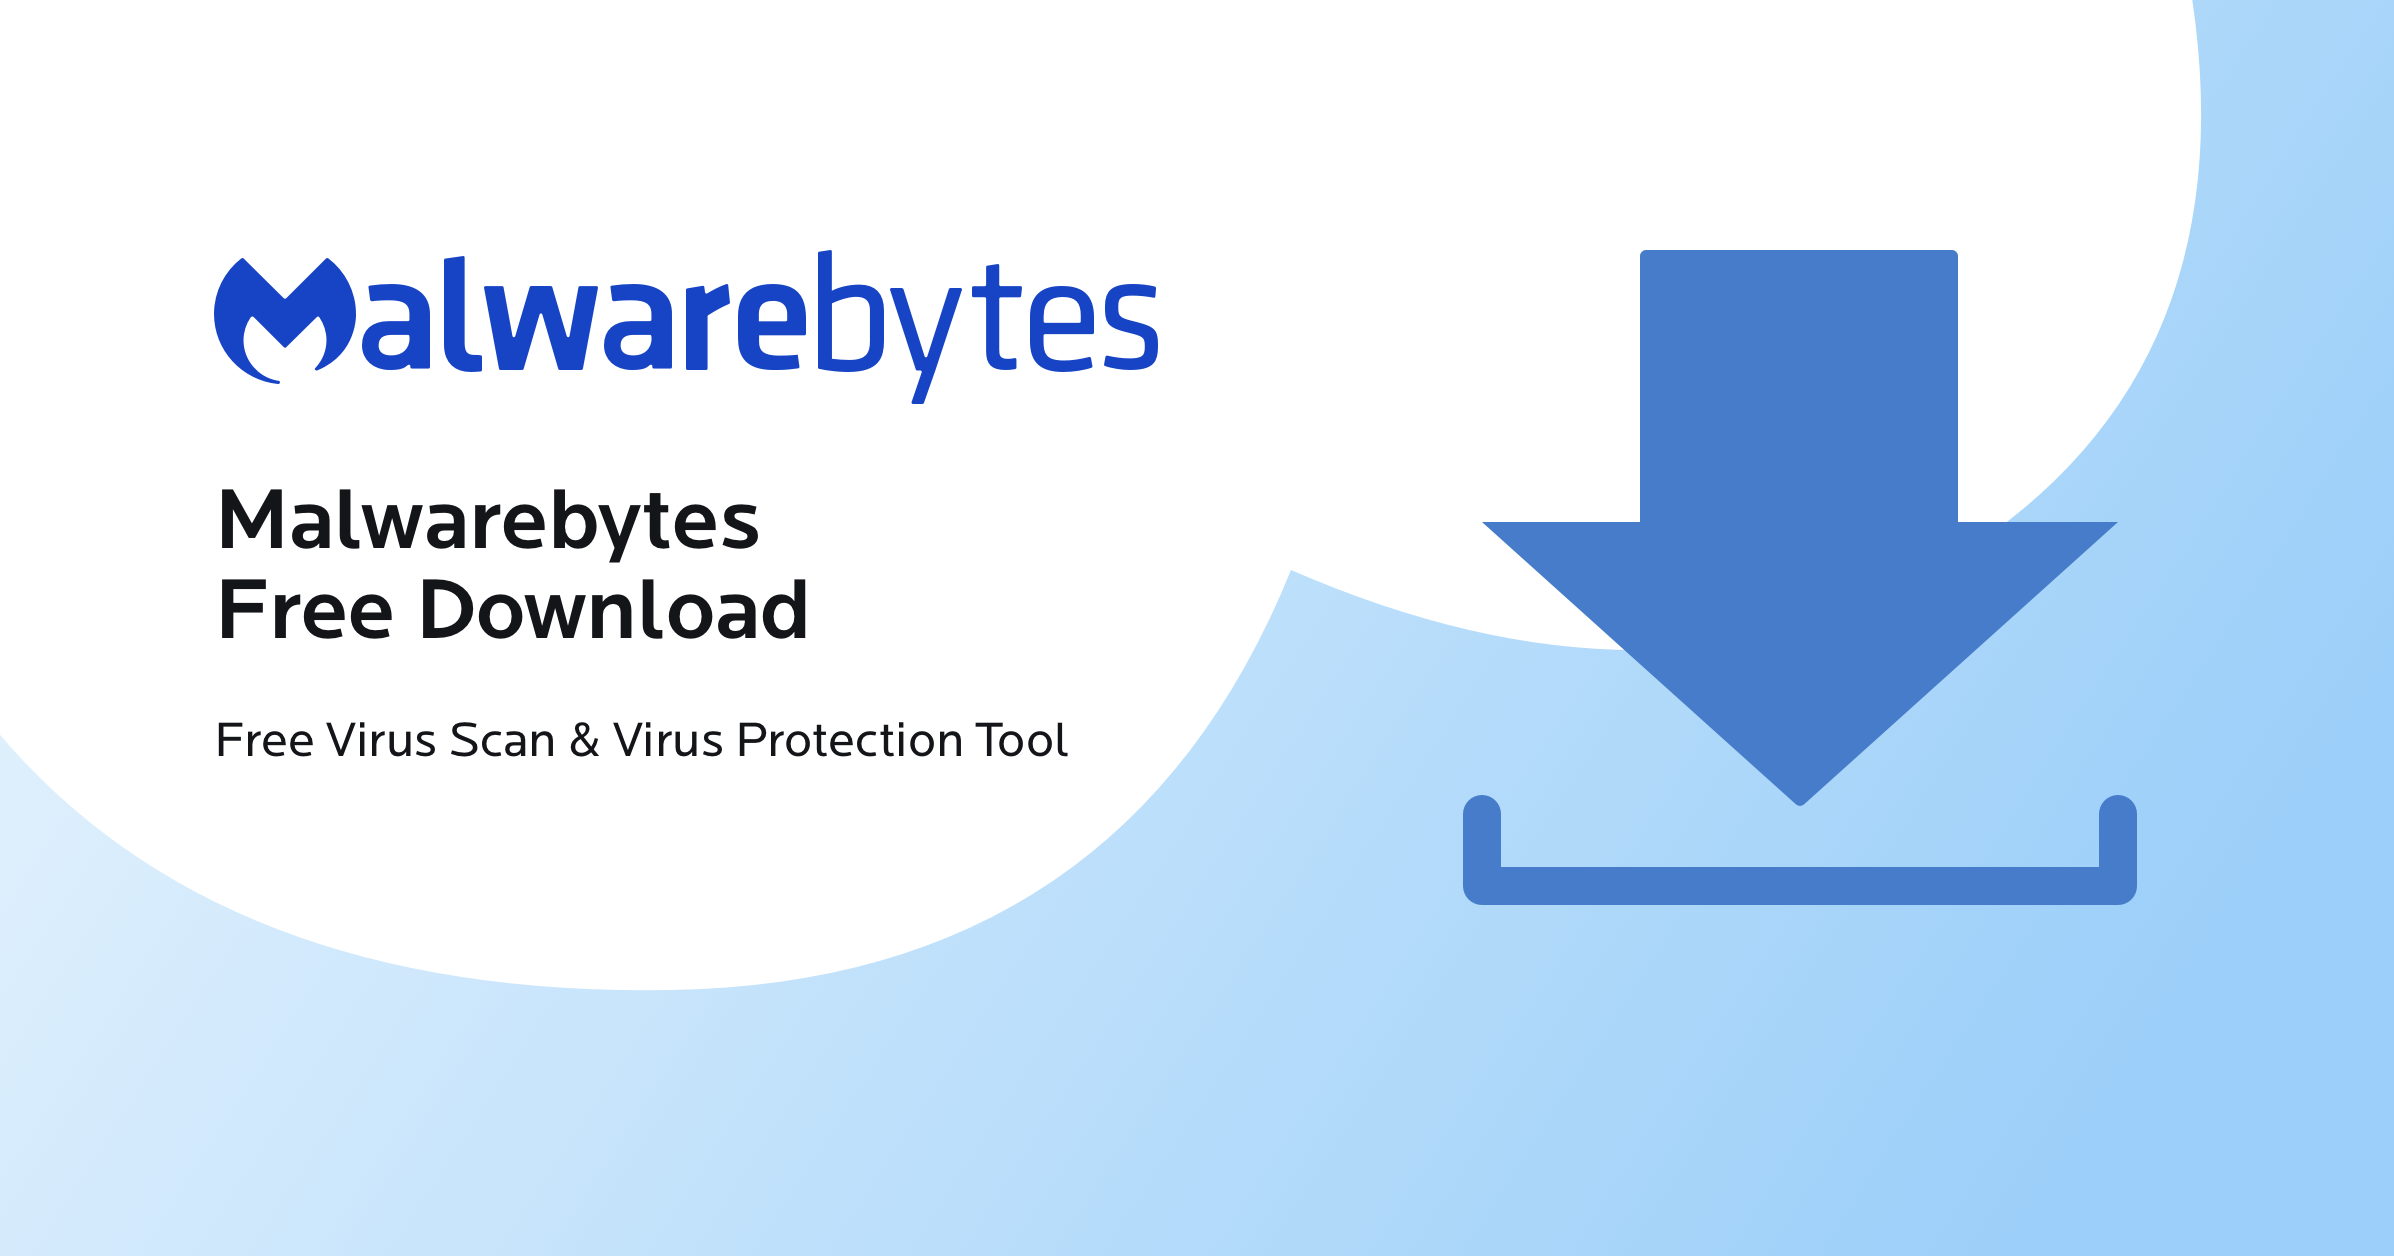 Install and run a reputable anti-malware program such as Malwarebytes.
Perform a full system scan and remove any detected malware.